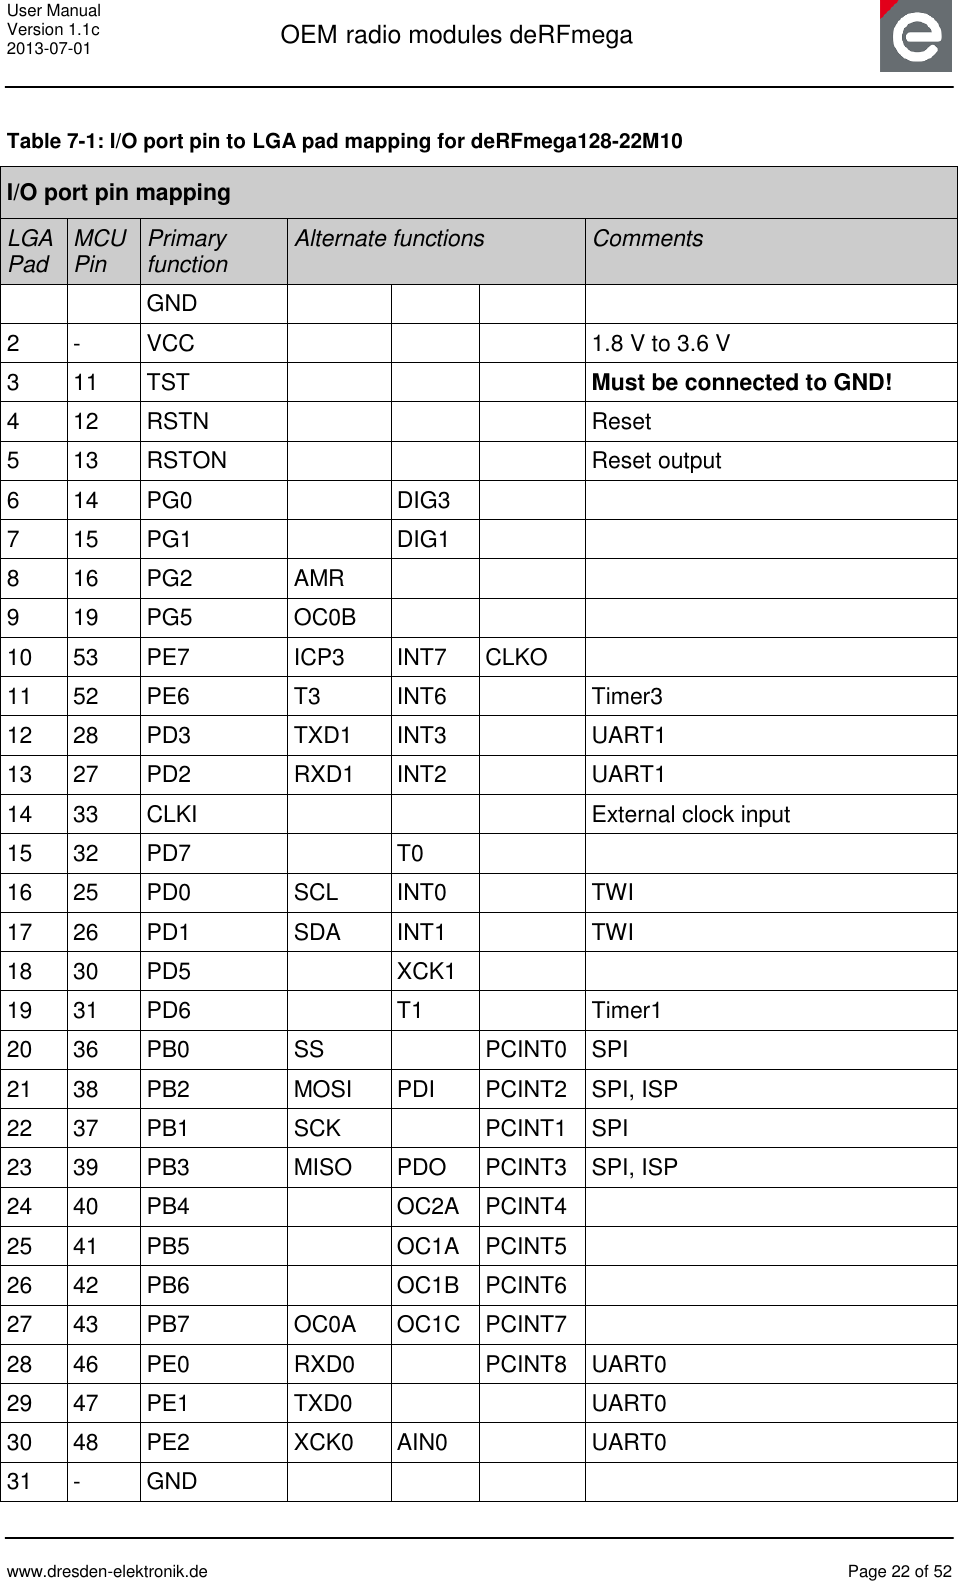 User Manual Version 1.1c 2013-07-01  OEM radio modules deRFmega      www.dresden-elektronik.de  Page 22 of 52   Table 7-1: I/O port pin to LGA pad mapping for deRFmega128-22M10 I/O port pin mapping LGA Pad MCU Pin Primary function Alternate functions Comments   GND     2 - VCC    1.8 V to 3.6 V 3 11 TST    Must be connected to GND! 4 12 RSTN    Reset 5 13 RSTON    Reset output 6 14 PG0  DIG3   7 15 PG1  DIG1   8 16 PG2 AMR    9 19 PG5 OC0B    10 53 PE7 ICP3 INT7 CLKO  11 52 PE6 T3 INT6  Timer3 12 28 PD3 TXD1 INT3  UART1 13 27 PD2 RXD1 INT2  UART1 14 33 CLKI    External clock input 15 32 PD7  T0   16 25 PD0 SCL INT0  TWI 17 26 PD1 SDA INT1  TWI 18 30 PD5  XCK1   19 31 PD6  T1  Timer1 20 36 PB0 SS  PCINT0 SPI 21 38 PB2 MOSI PDI PCINT2 SPI, ISP 22 37 PB1 SCK  PCINT1 SPI 23 39 PB3 MISO PDO PCINT3 SPI, ISP 24 40 PB4  OC2A PCINT4  25 41 PB5  OC1A PCINT5  26 42 PB6   OC1B PCINT6  27 43 PB7 OC0A OC1C PCINT7  28 46 PE0 RXD0  PCINT8 UART0 29 47 PE1 TXD0   UART0 30 48 PE2 XCK0 AIN0  UART0 31 - GND     